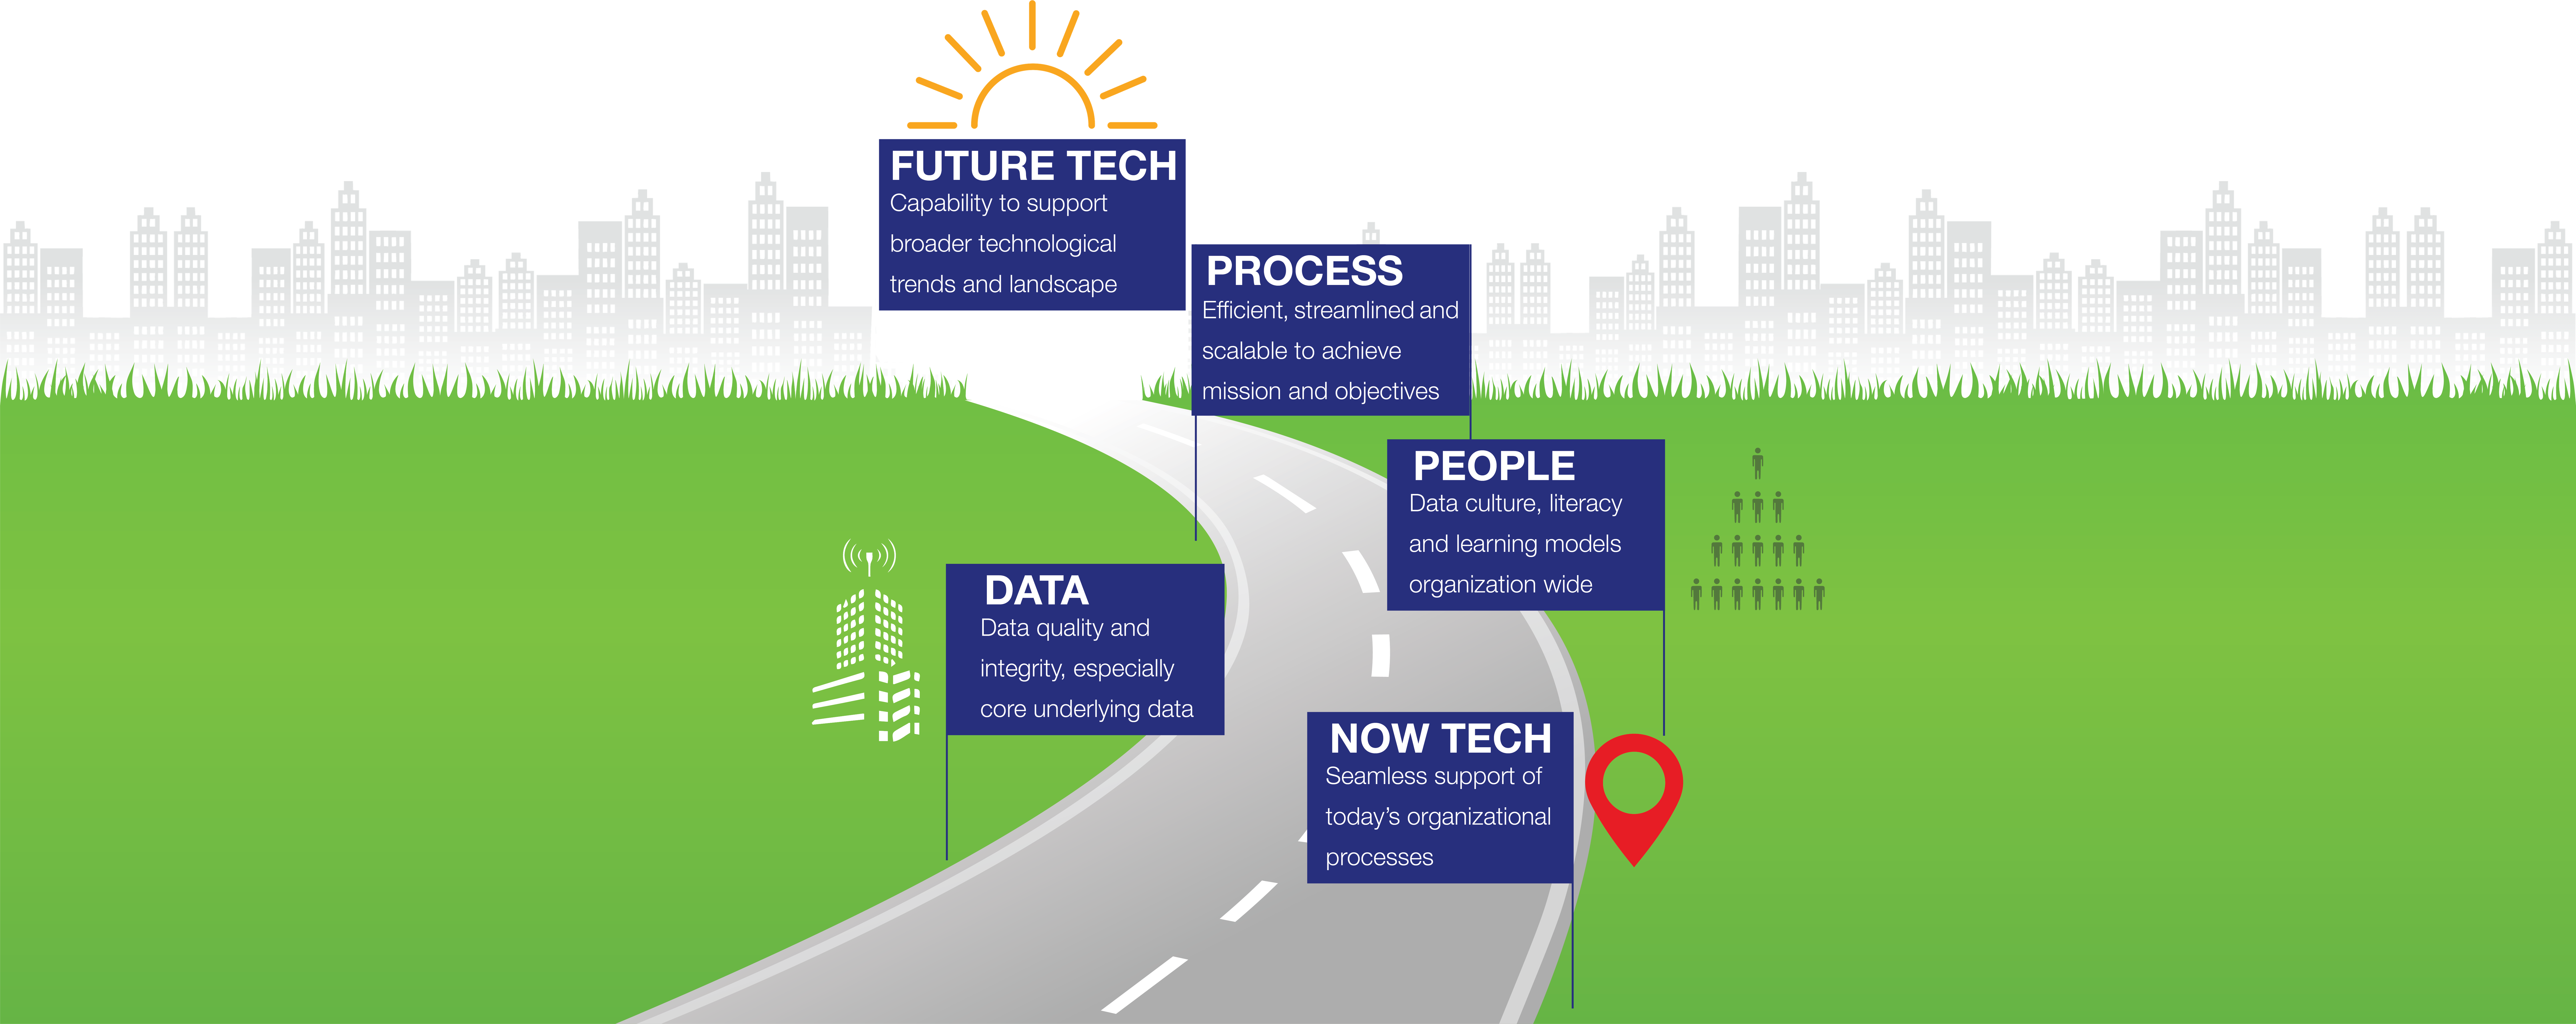 WIN Digital Solutions Strategic Audit & Roadmap is a digital
readiness journey with signposts along the way: Now Tech, Data, People, Process, Future Tech.